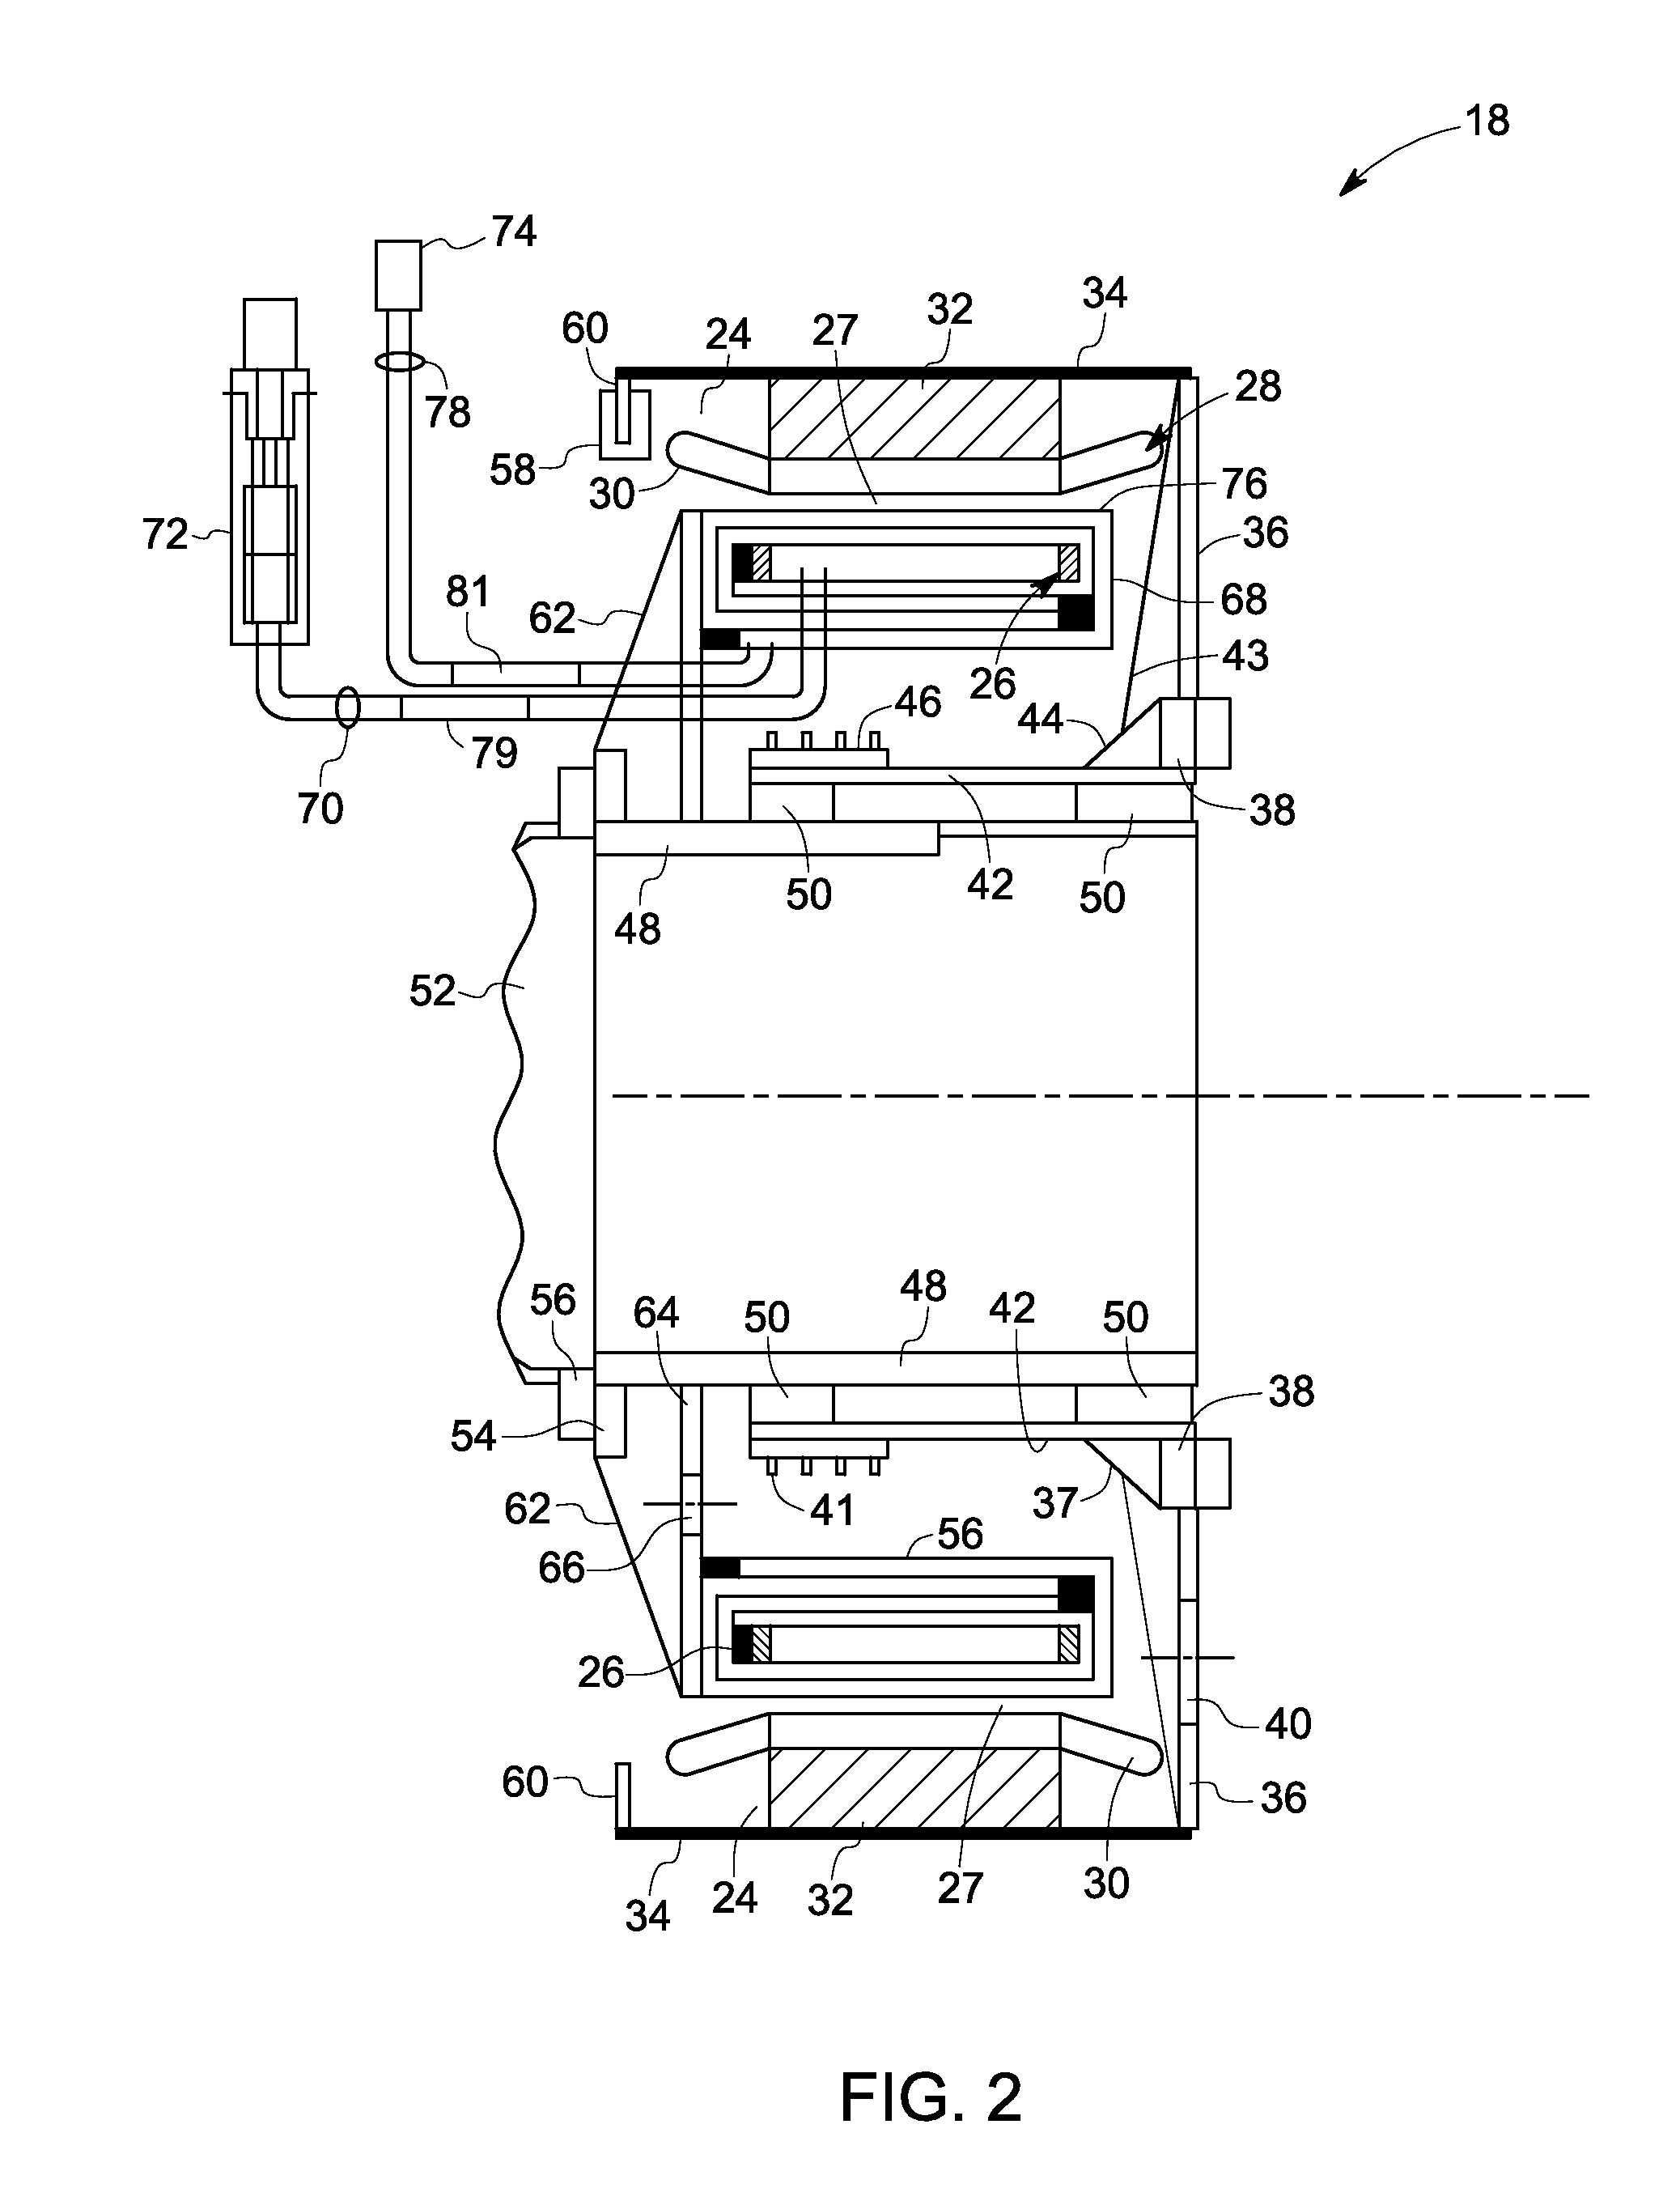 Superconducting power generation system and associated method for generating power